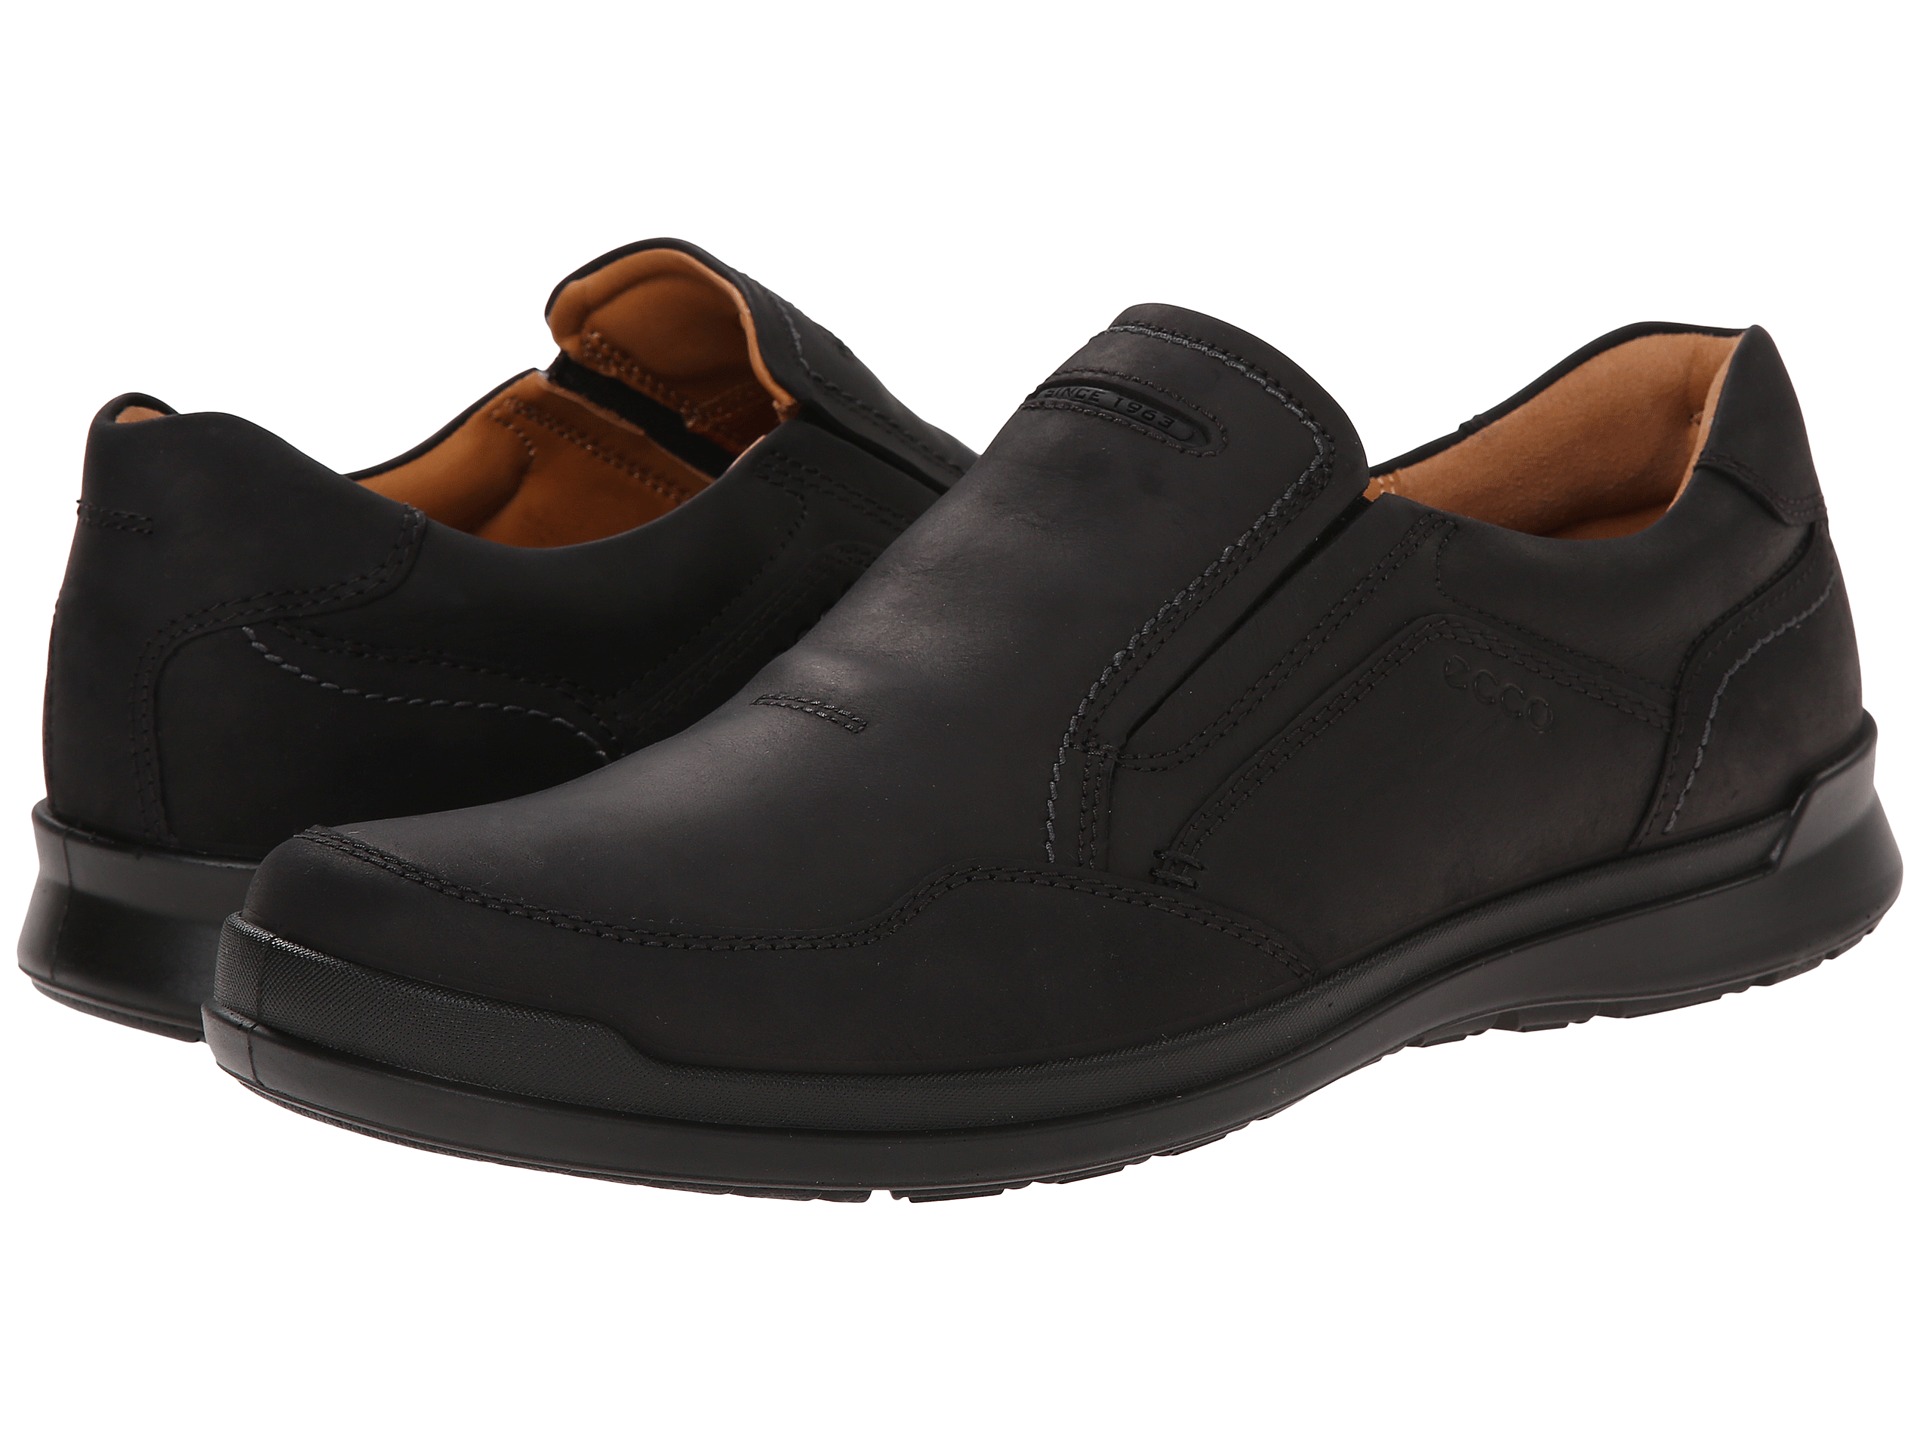 ECCO Howell Slip-On - Zappos Free Shipping BOTH Ways